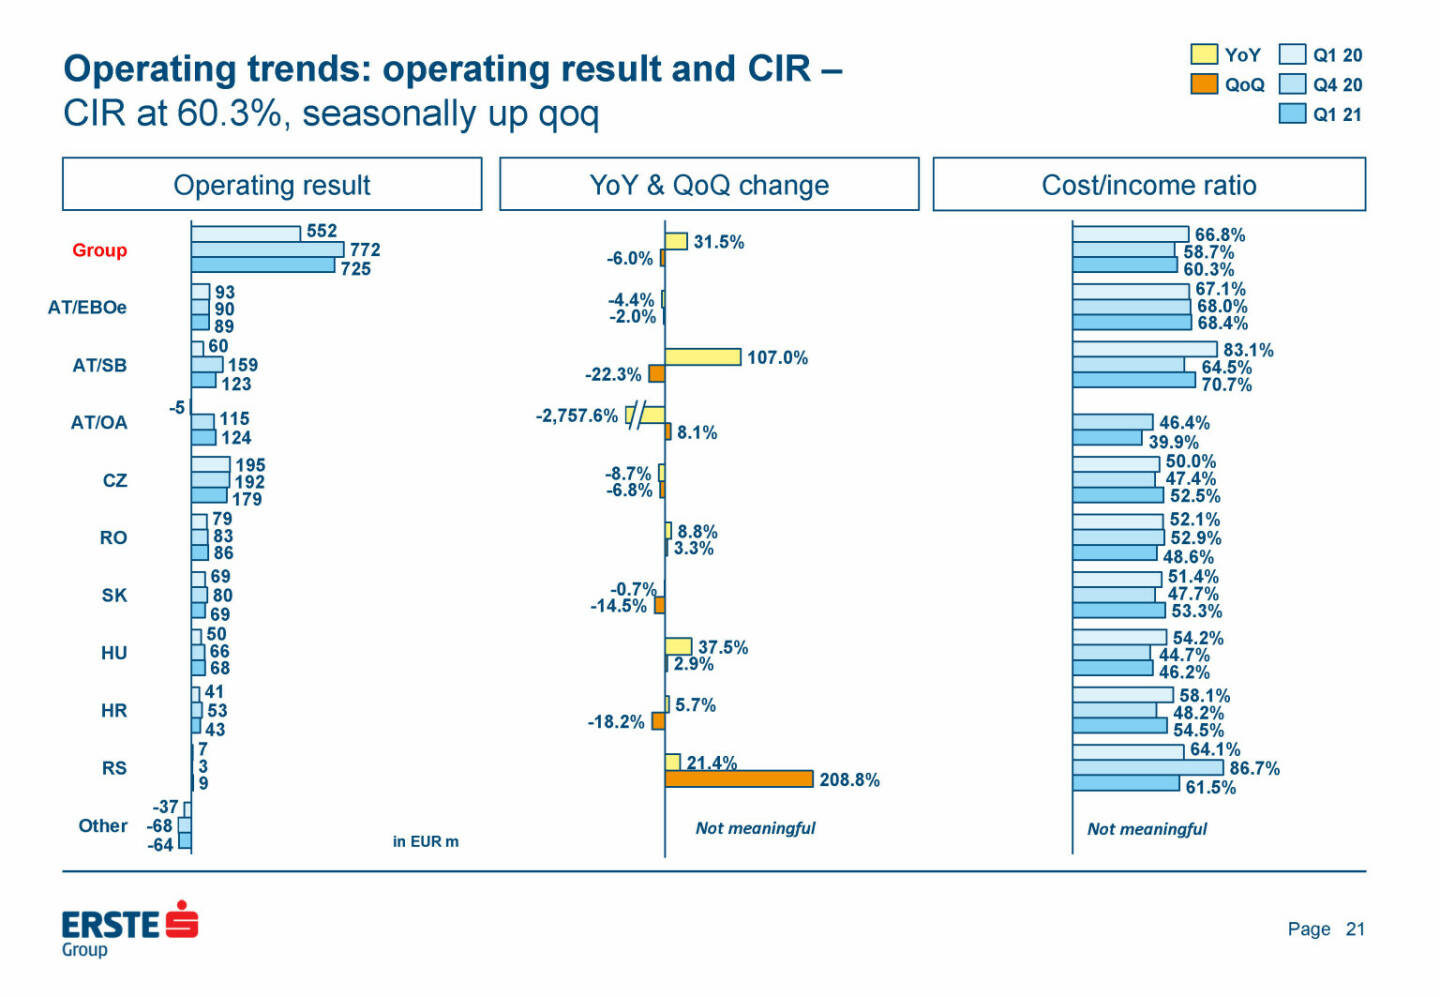 Erste Group - Operating trends: operating results and CIR